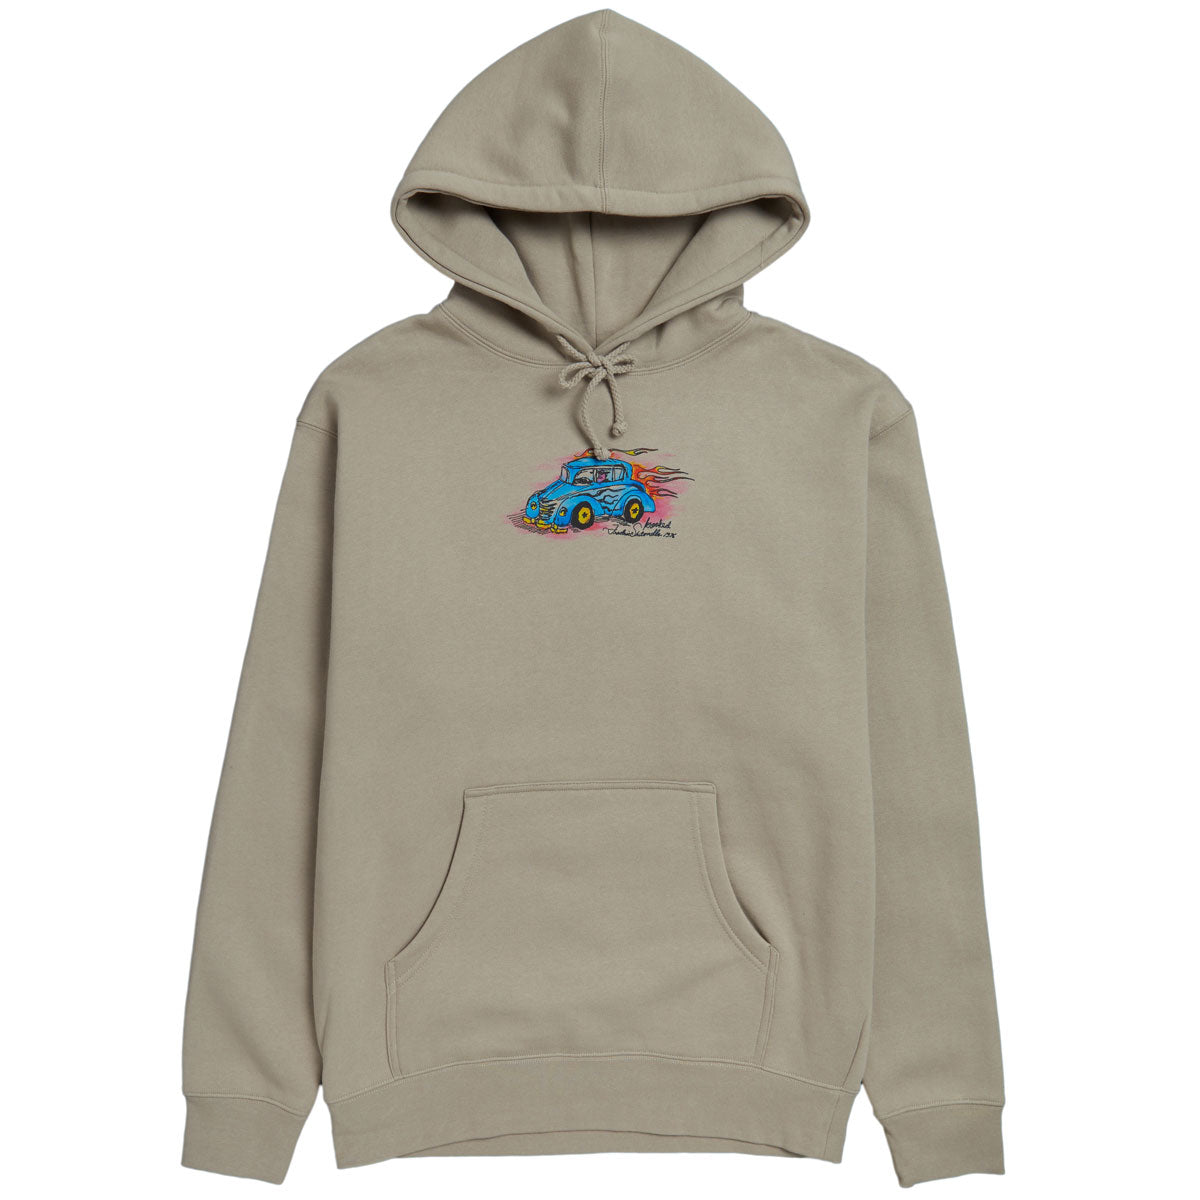 Krooked Attitude Hoodie - Cement image 1